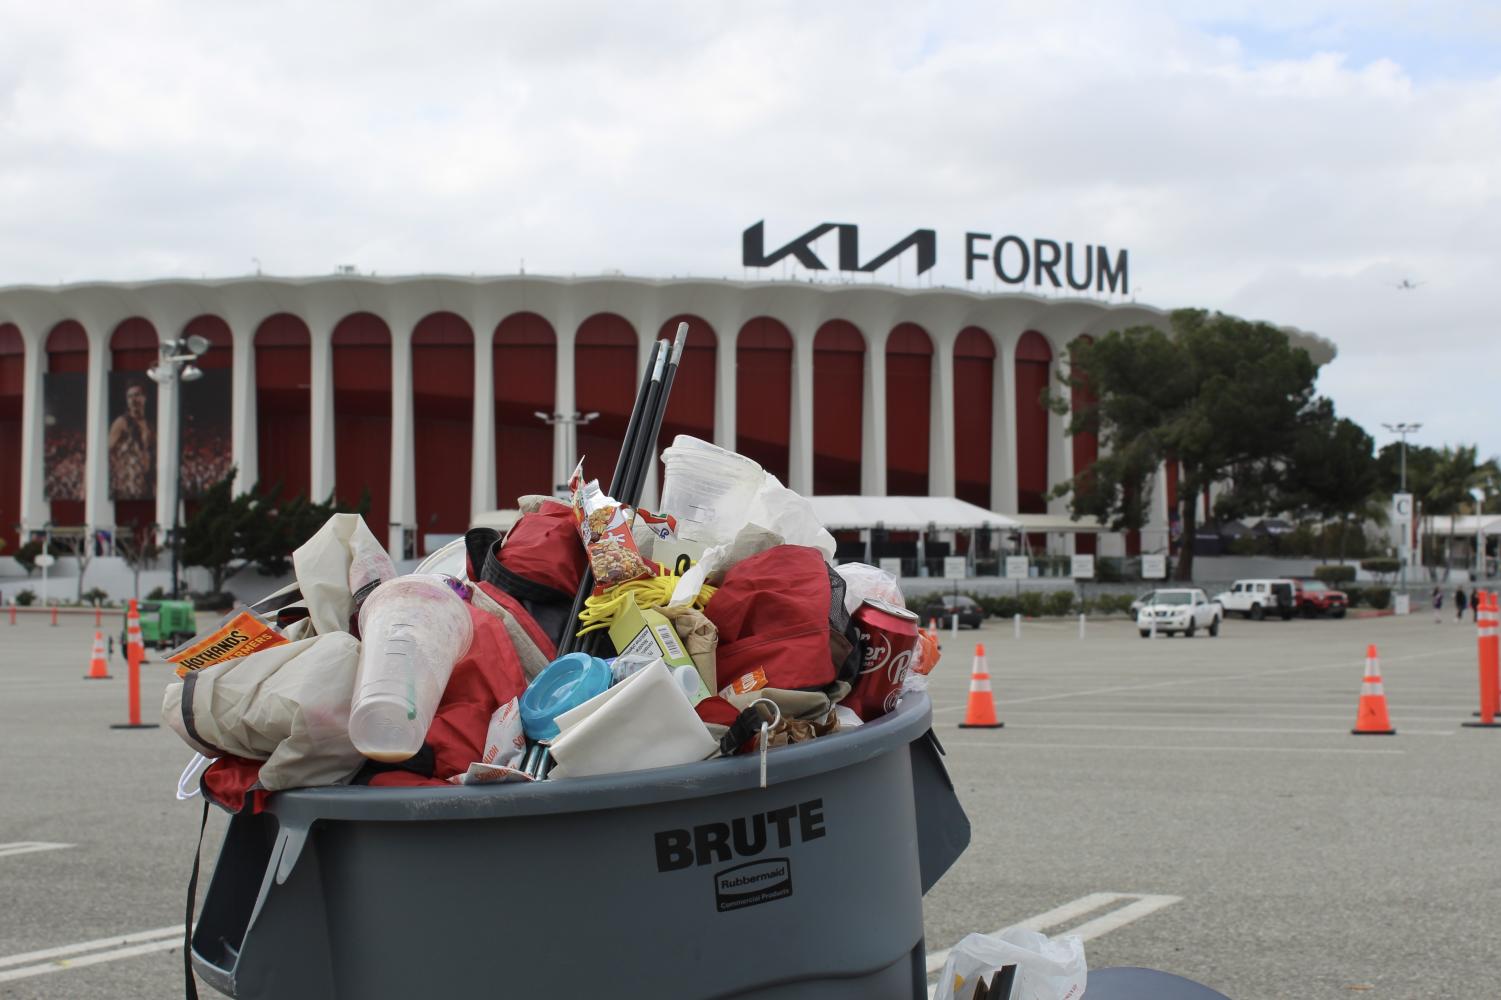 Fans' remnants of tents, air mattresses and food litter the streets of Inglewood following general admission wristband distribution into the Kia Forum. Campsites surrounding the outskirts of the venue left their trash on Jan. 29, 2023.